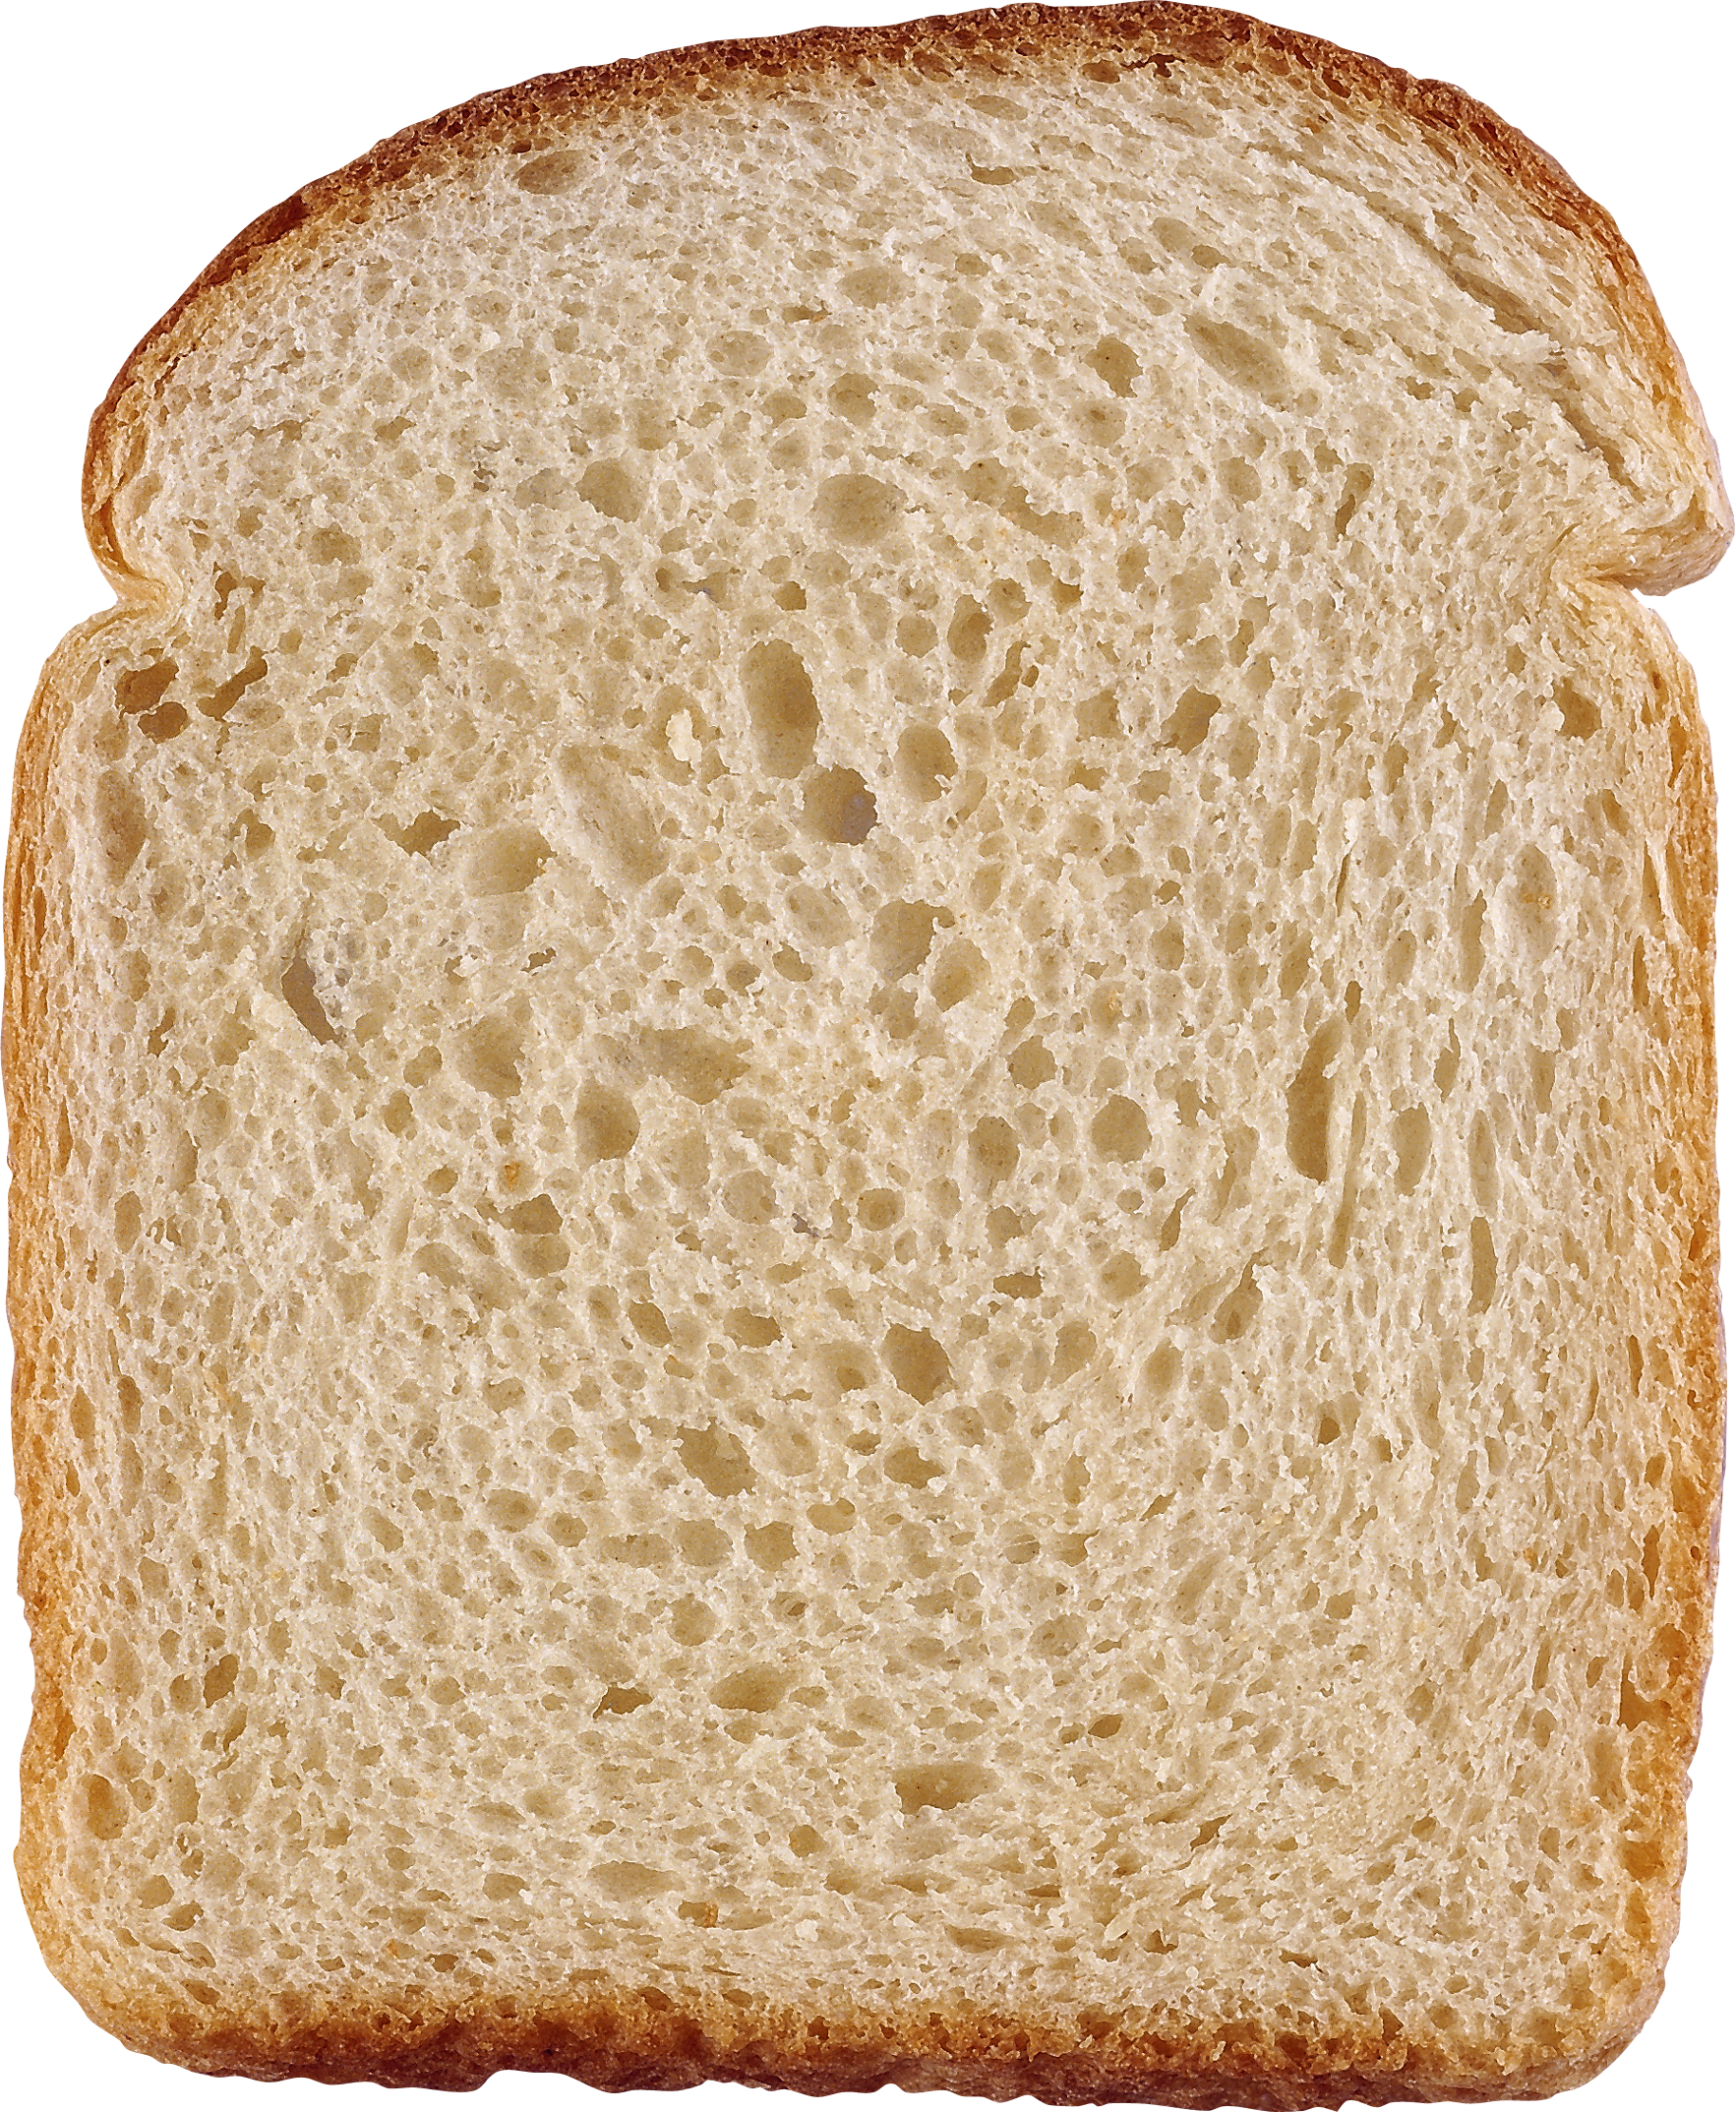 Png image free download. Clipart bread yeast bread